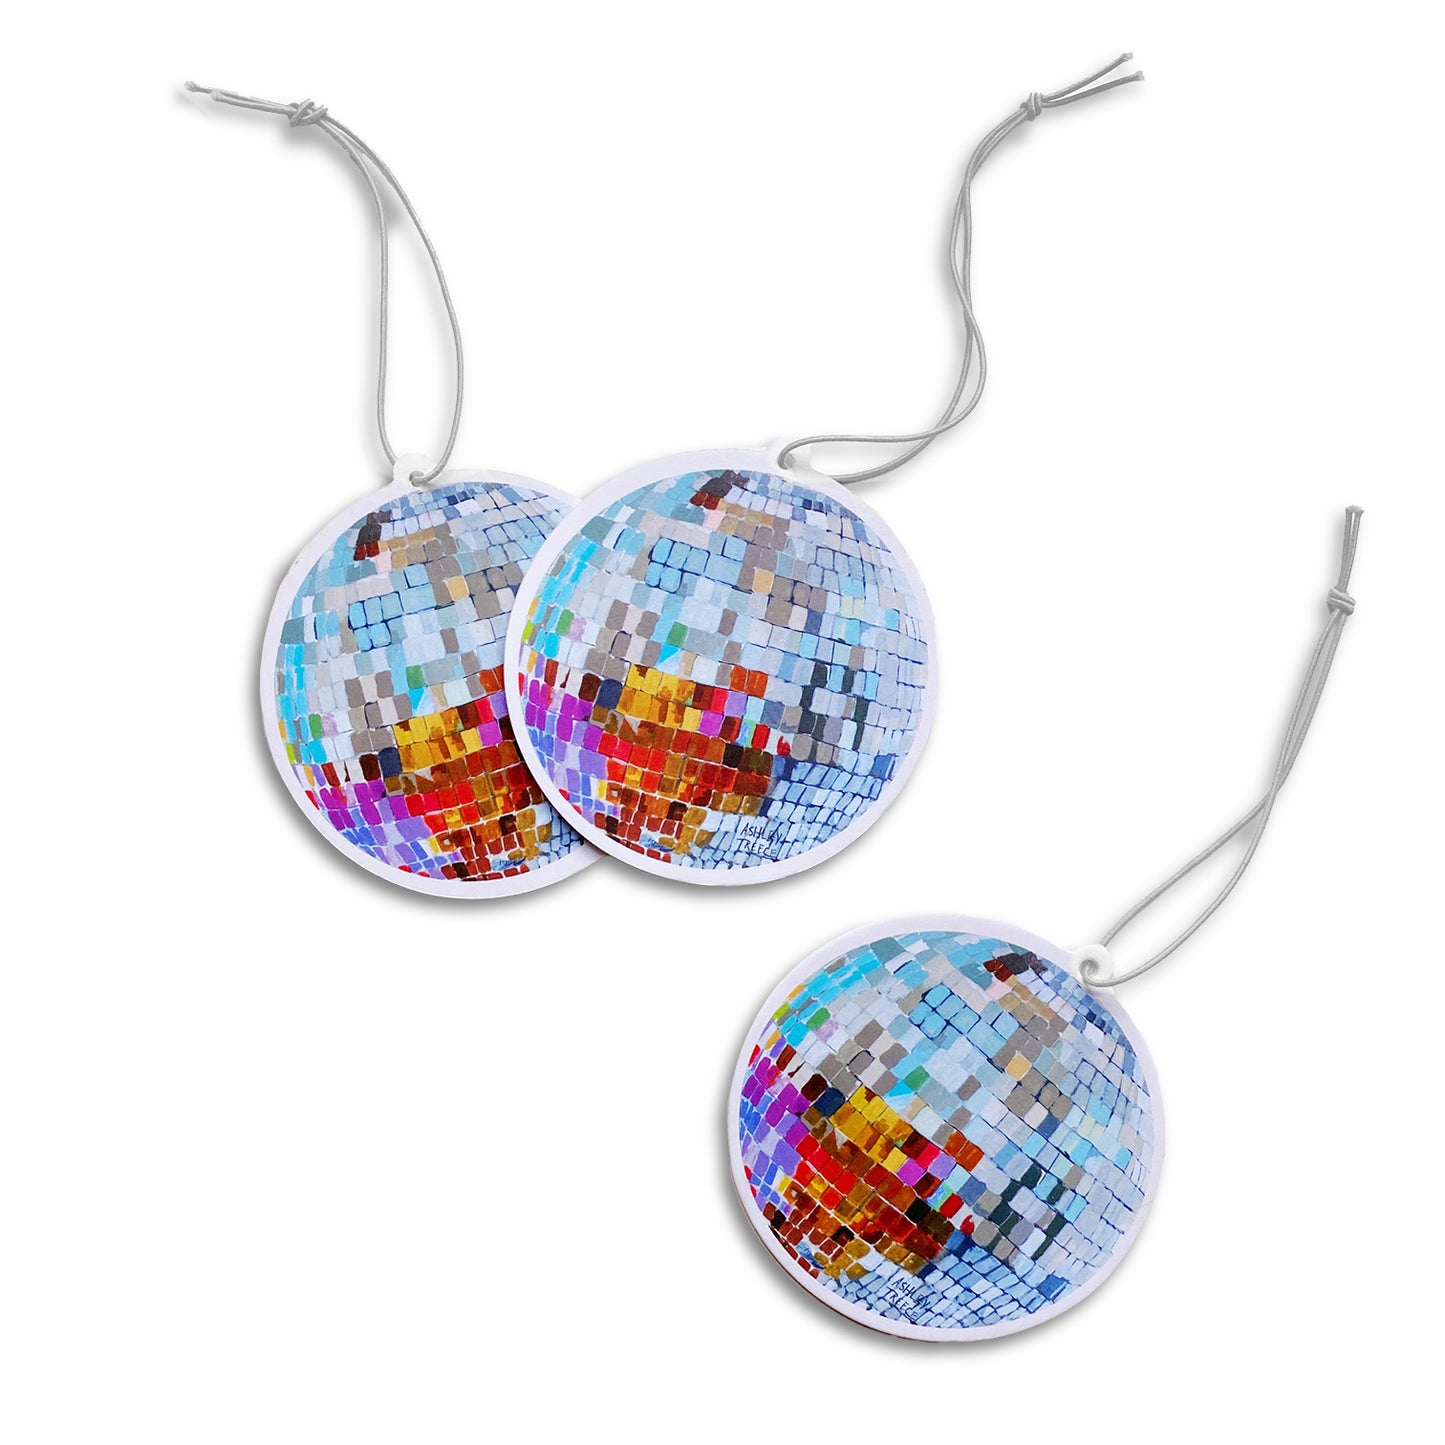 "Life of the Party" Disco Ball Air Freshener